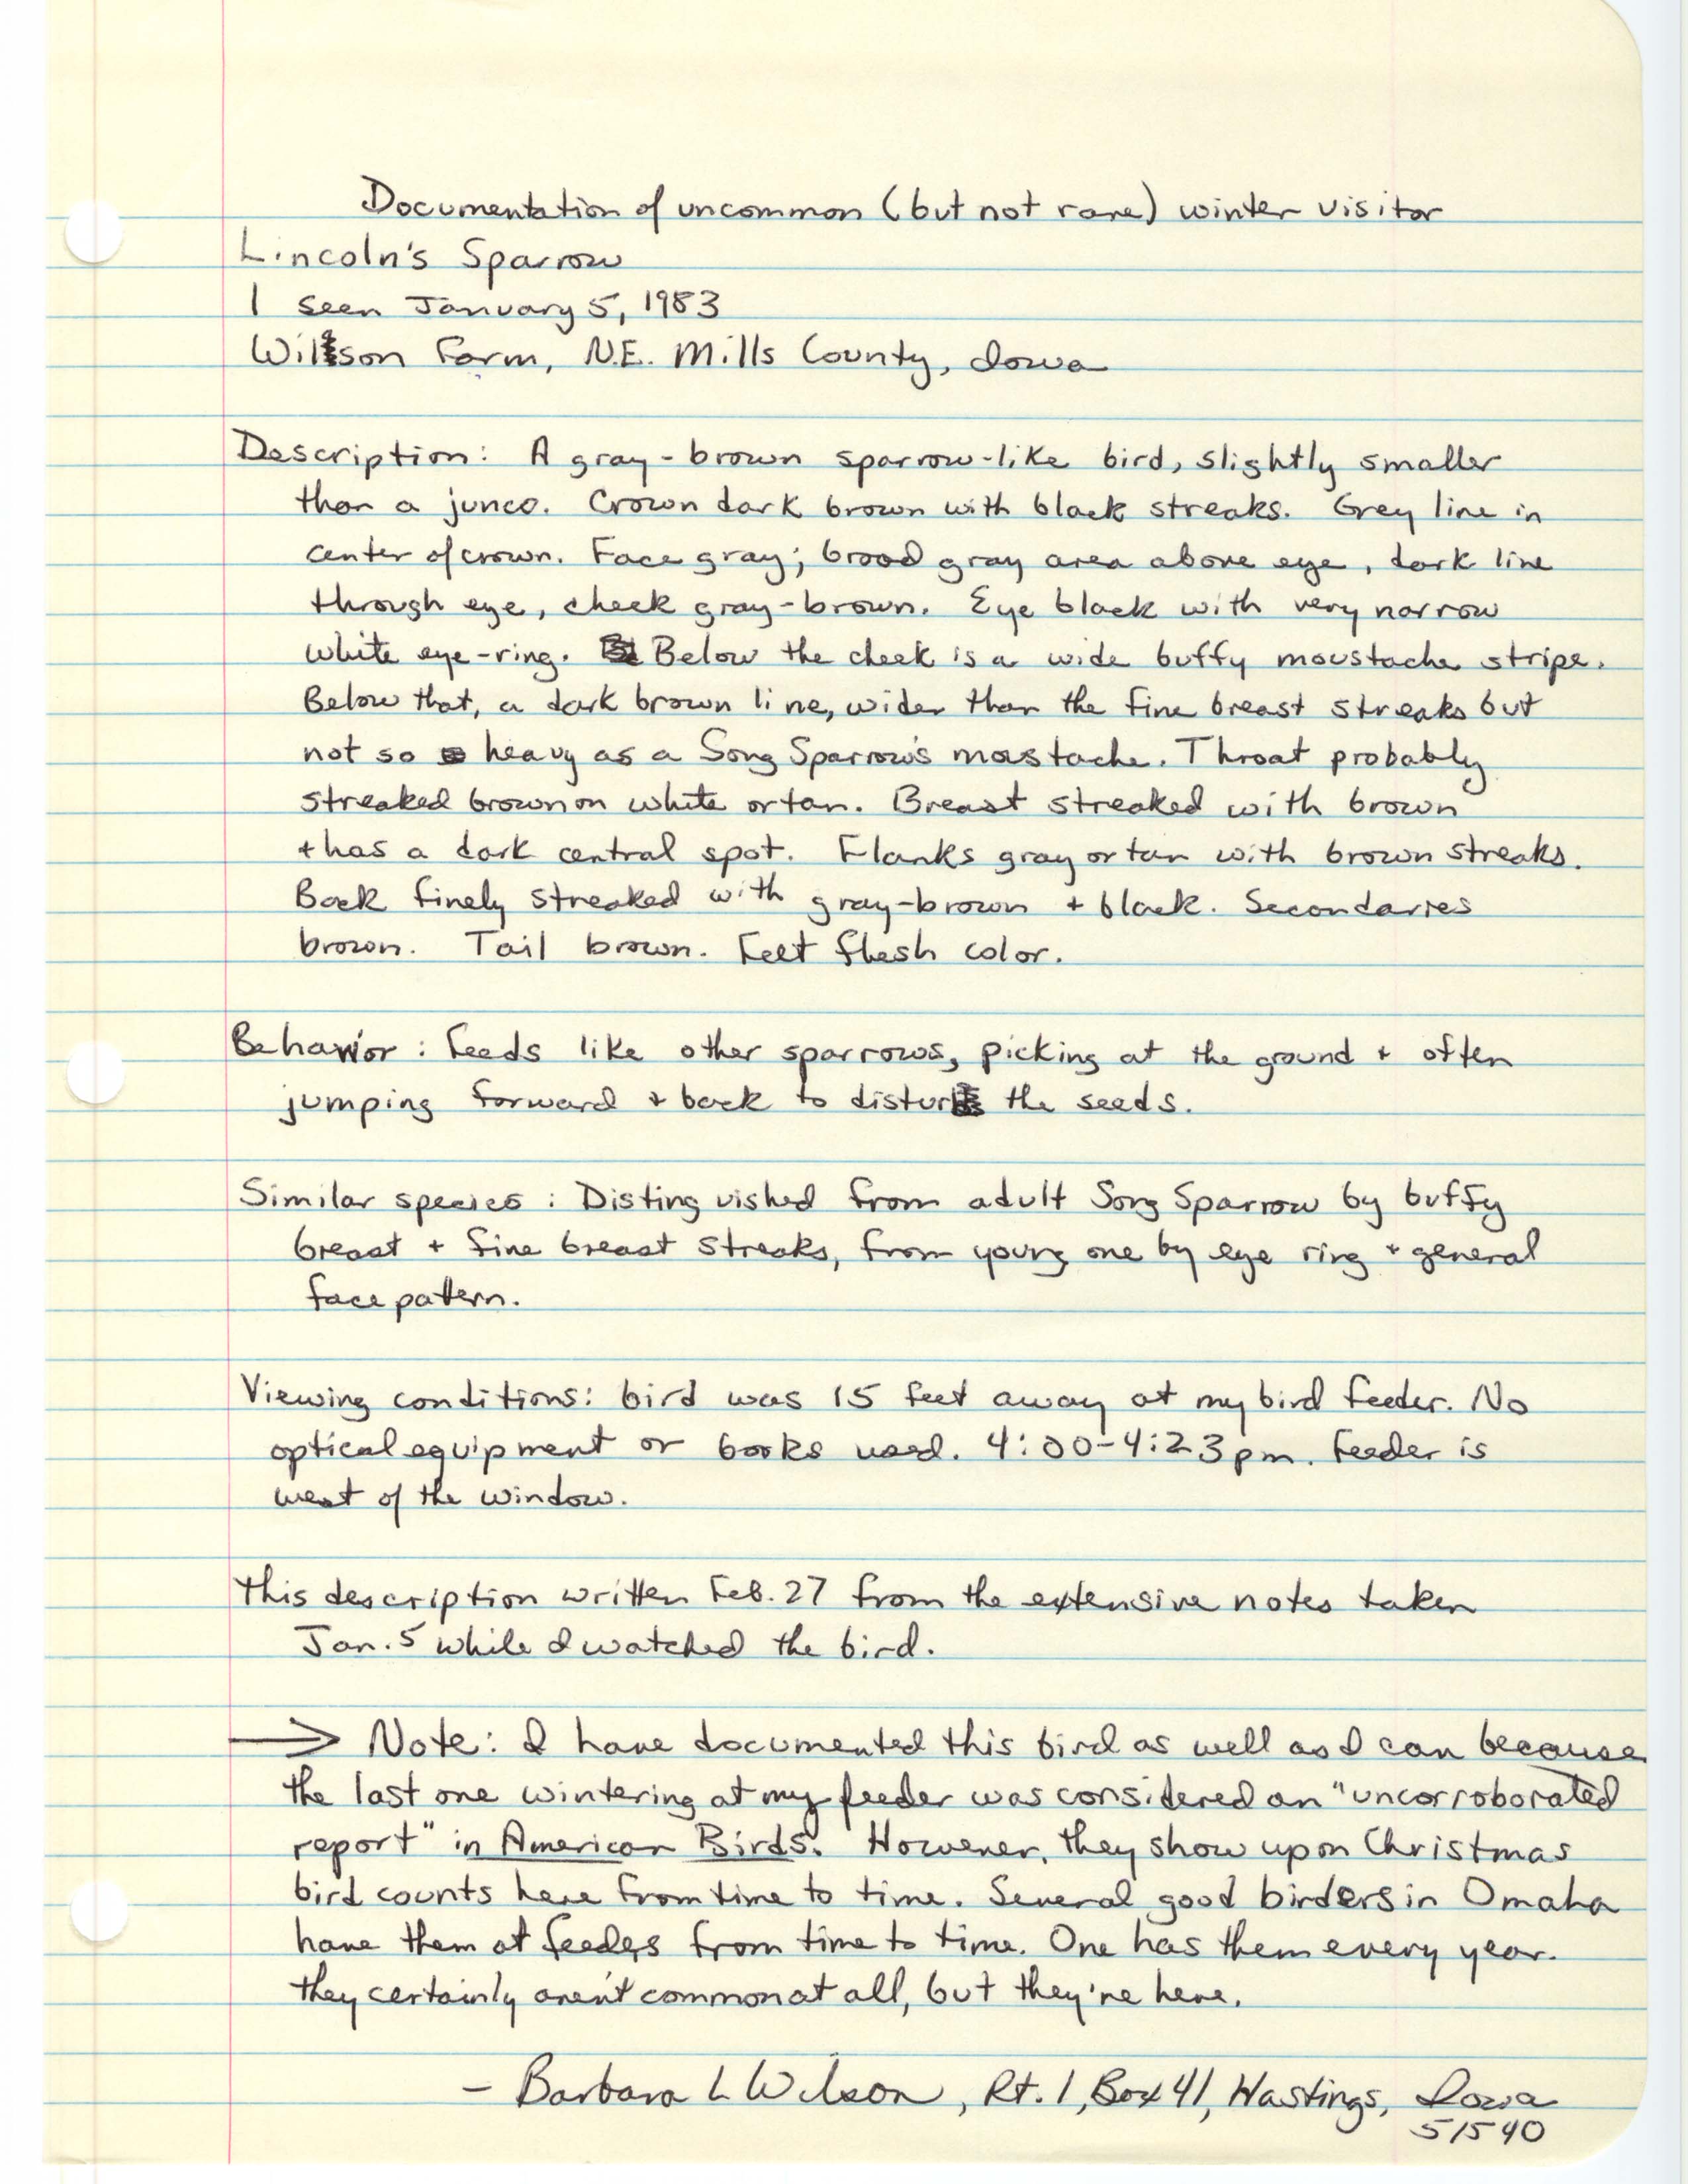 Rare bird documentation form for Lincoln's Sparrow northwest of Hastings, 1983